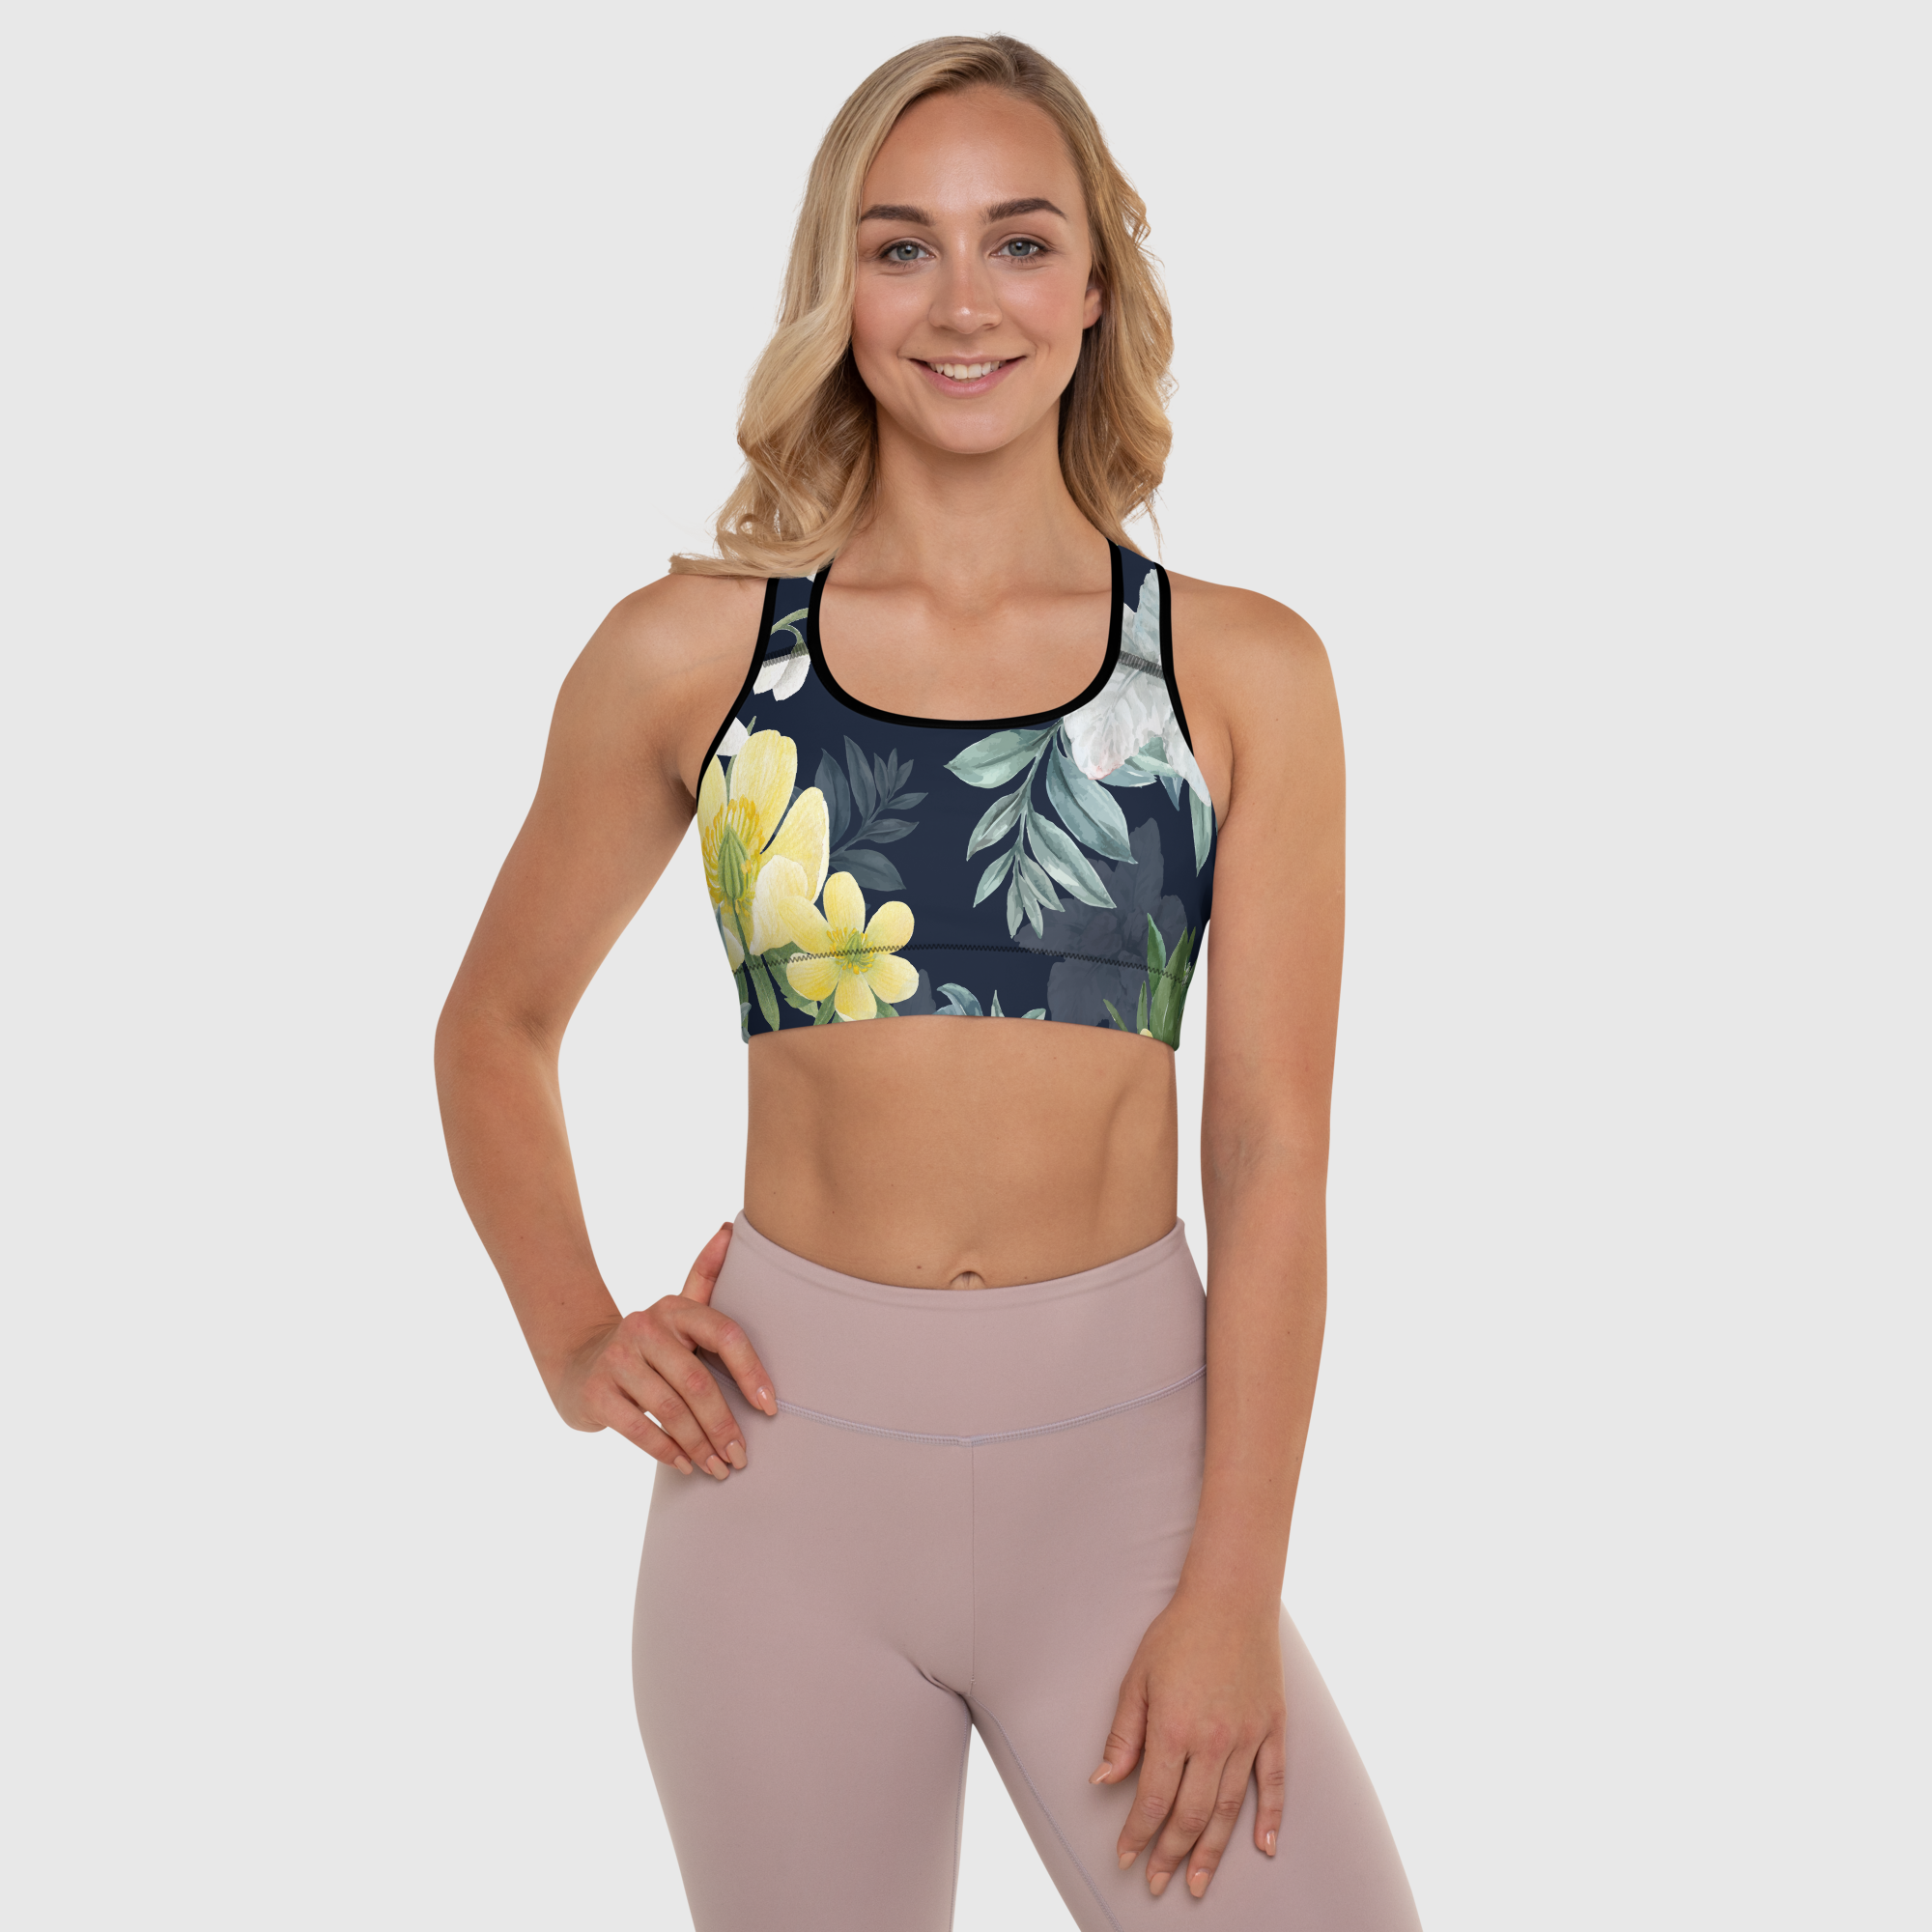 Fitness Floral Padded Sports Bra - Revive Wear Fitness Floral Padded Sports Bra at Revive Wear provides you with the ultimate support. Pair it with our workout leggings for free delivery. Shop today.